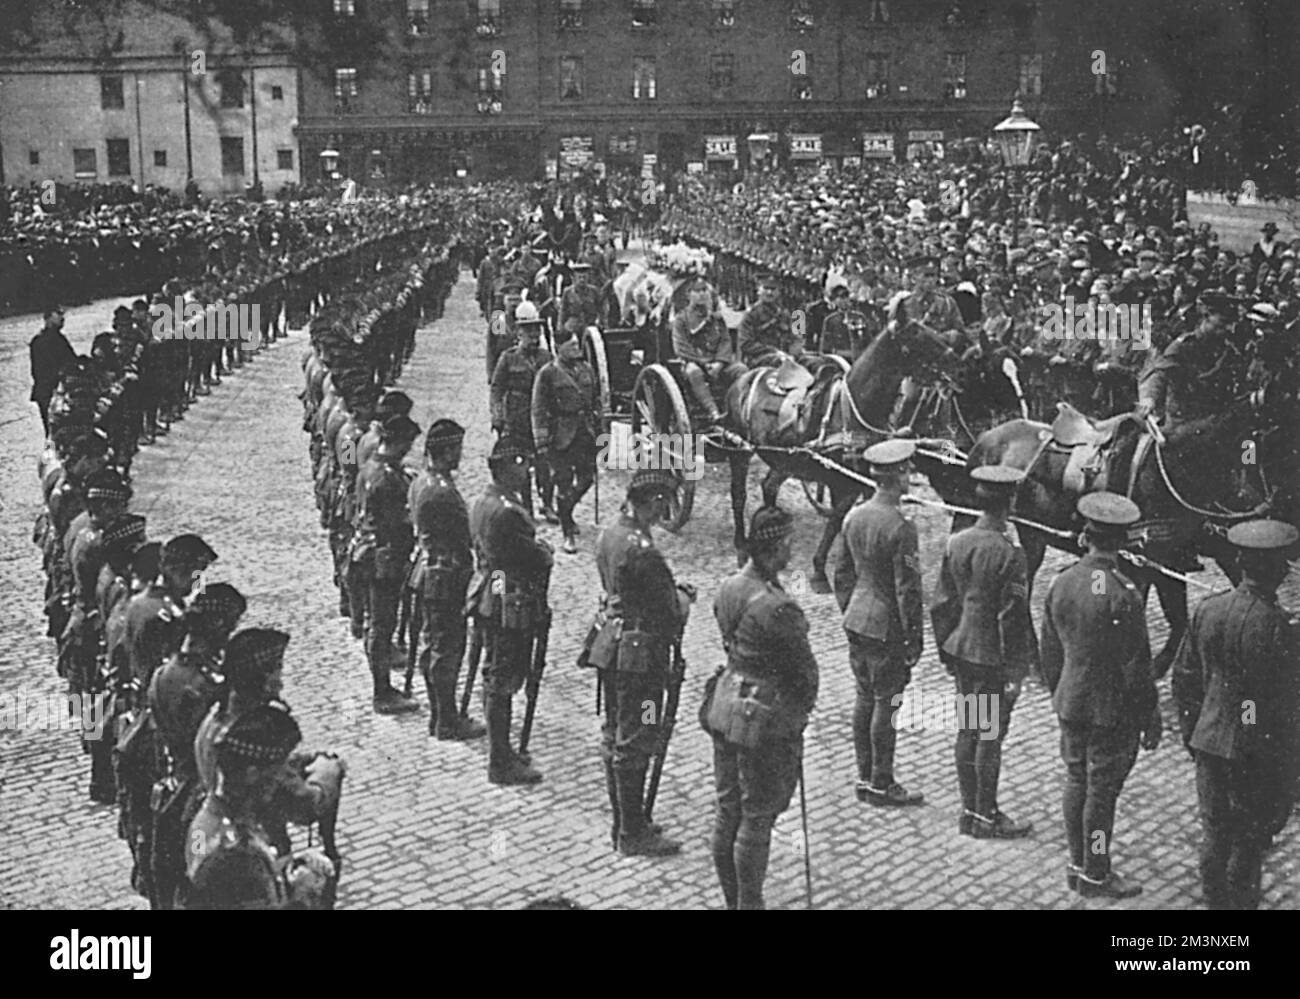 The funeral procession of Lieutenant General Sir James Moncrieff Grierson in Glasgow. He had been appointed to command the Second Army Corps in France, but died of a heart aneurism while on a train near Amiens on 17 August. His army career included service in Egypt, Sudan and the Second Boer War in 1900  22 August 1914 Stock Photo